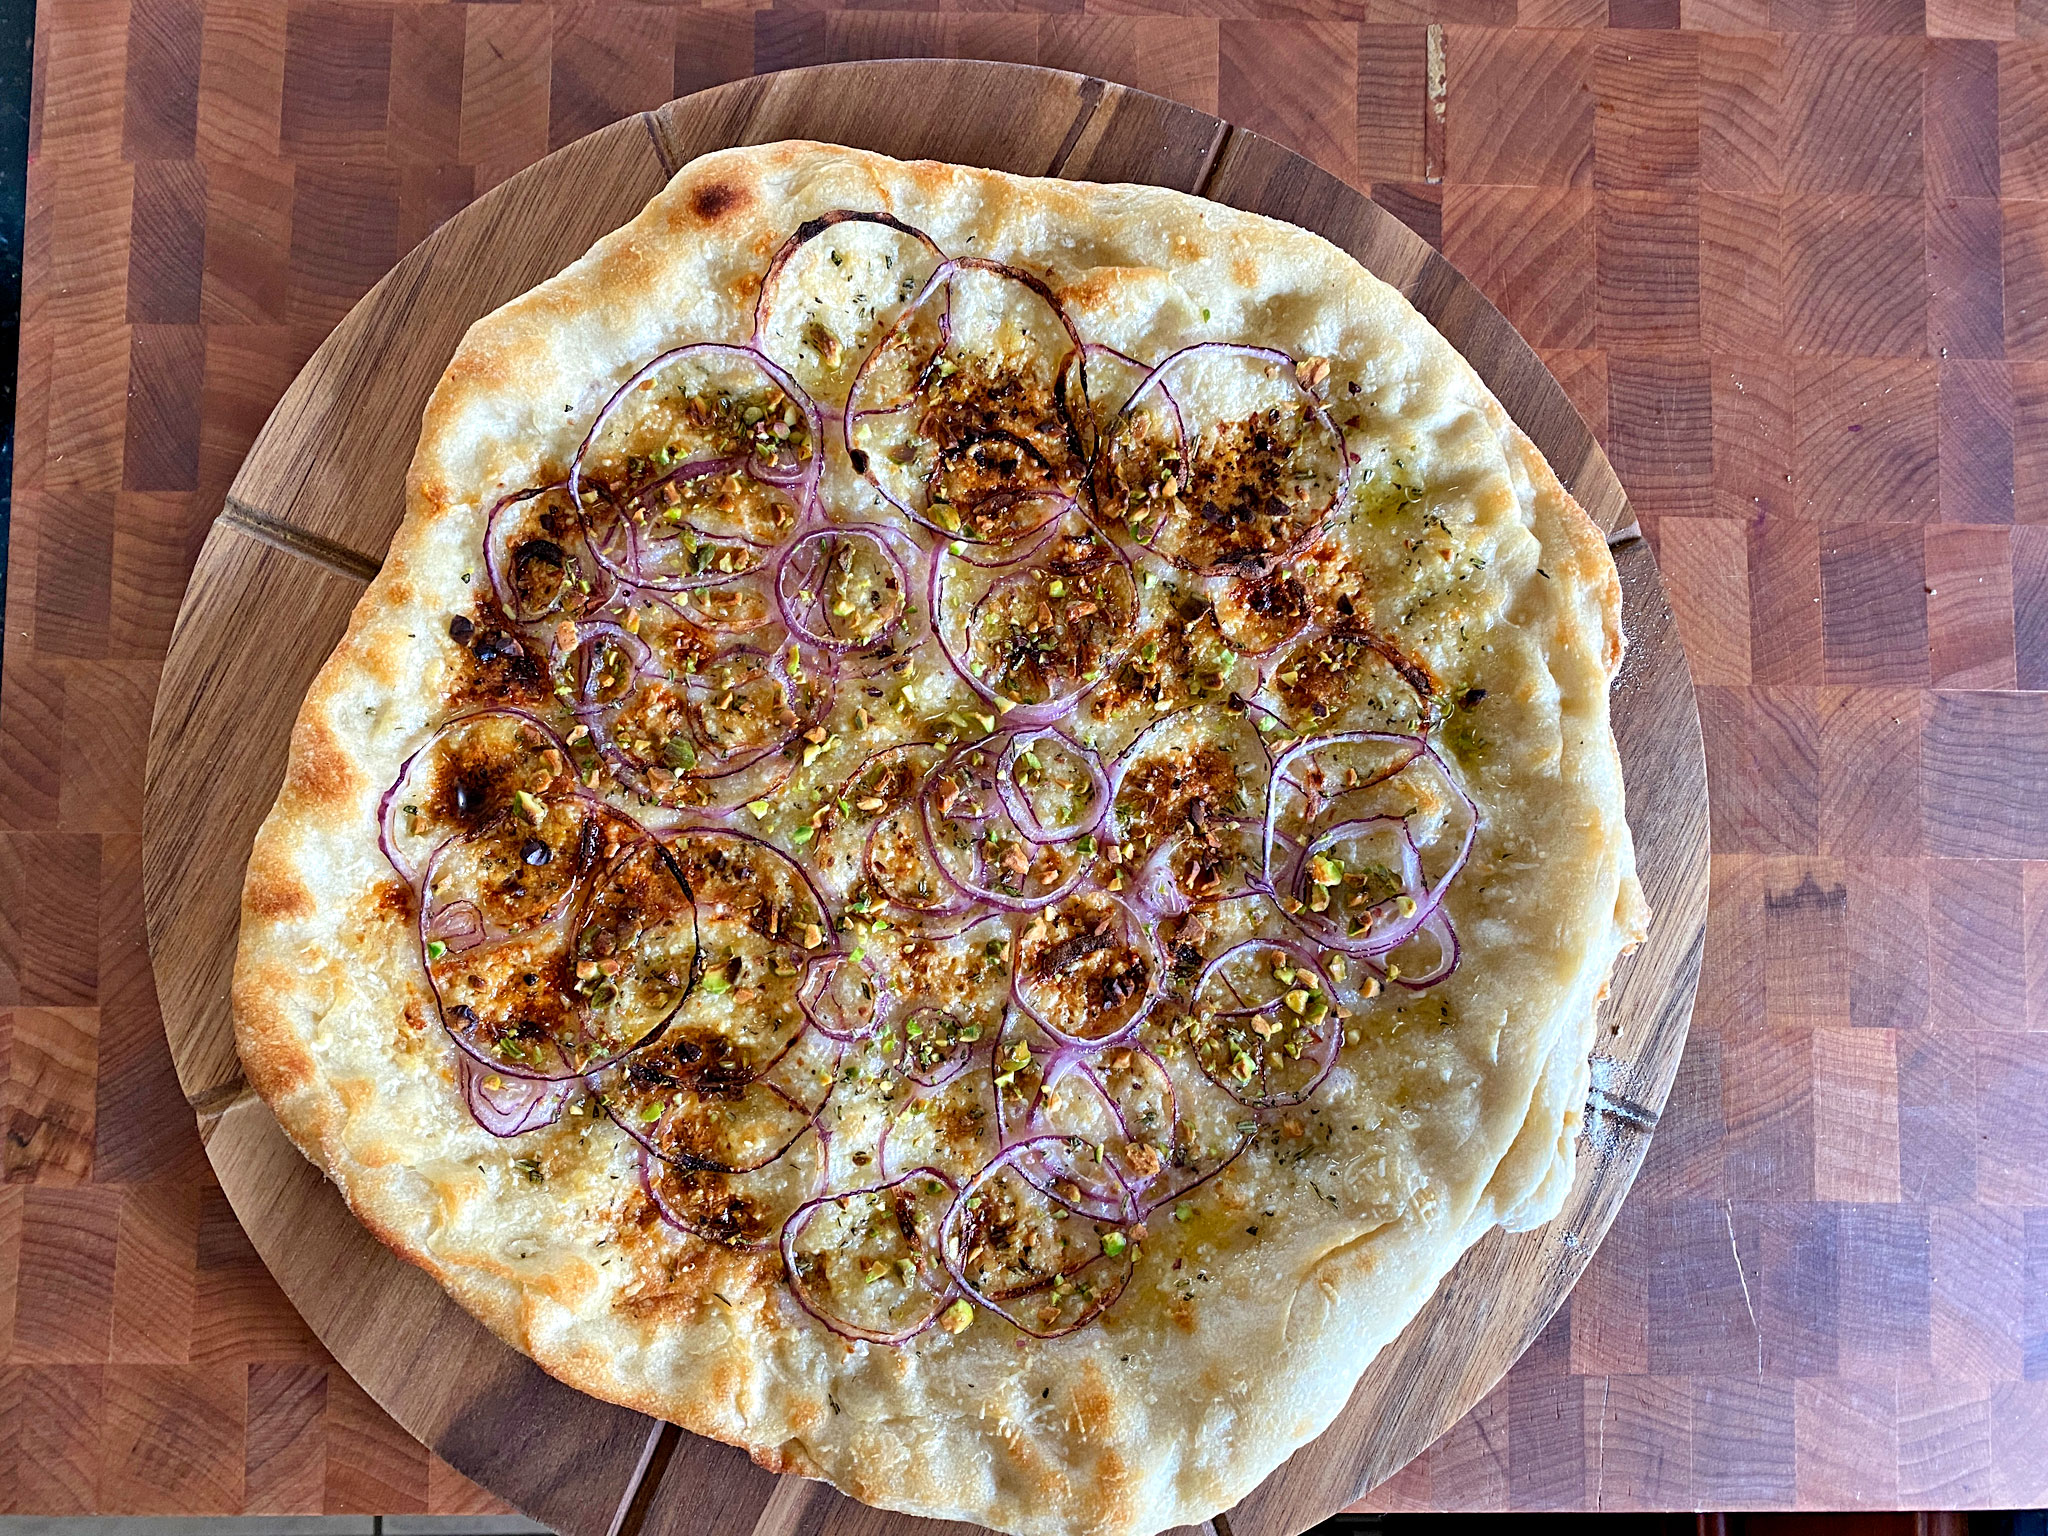 Chris Bianco's Pizza Rosa - Parmigiano-Reggiano, red onion, rosemary, pistachios, extra-virgin olive oil